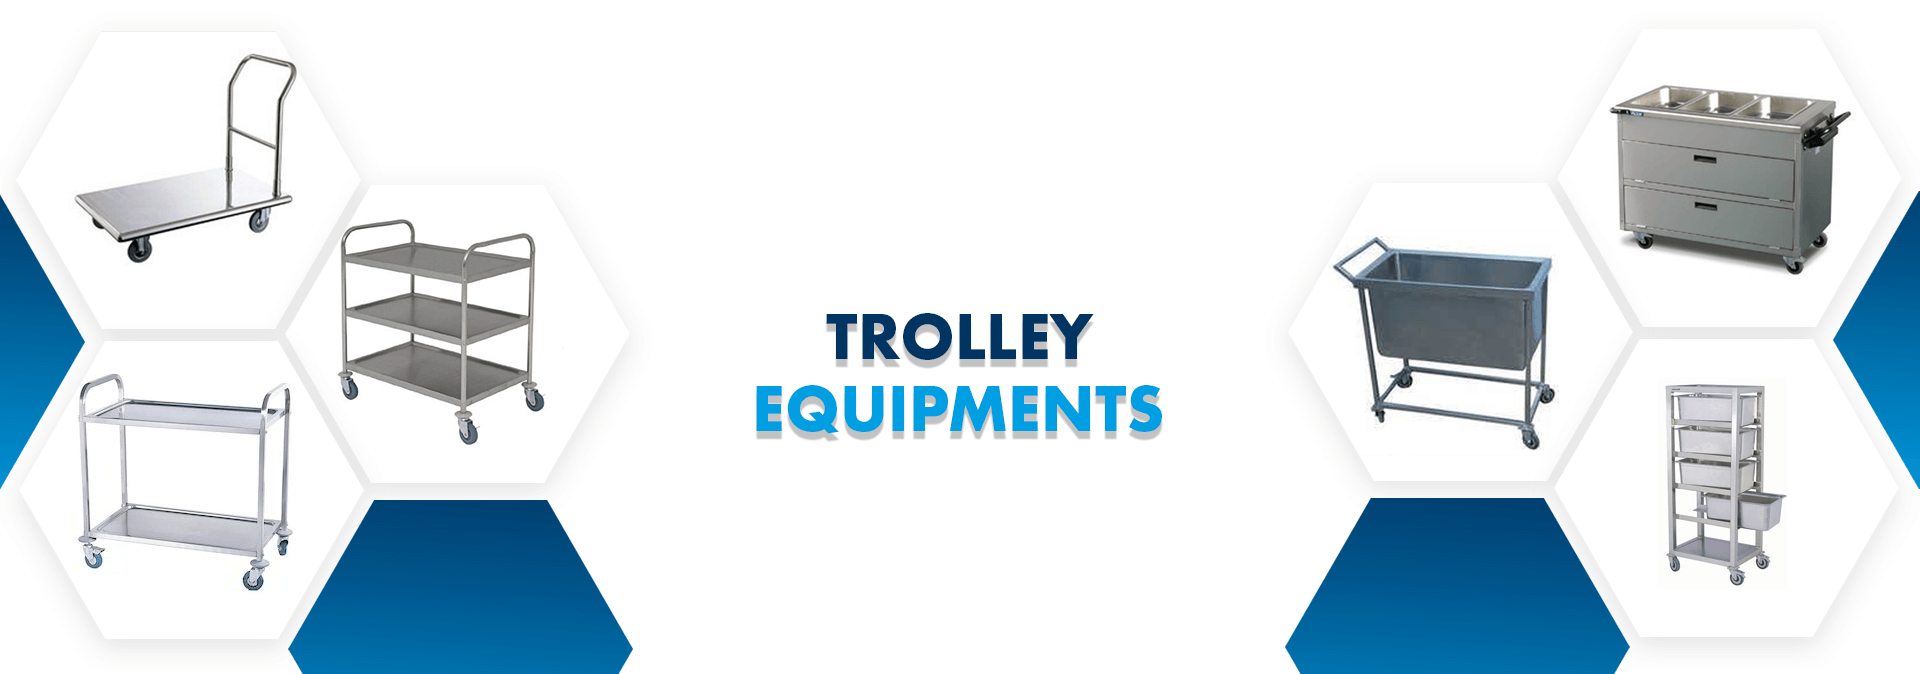 Trolley Equipments Suppliers in Bangalore